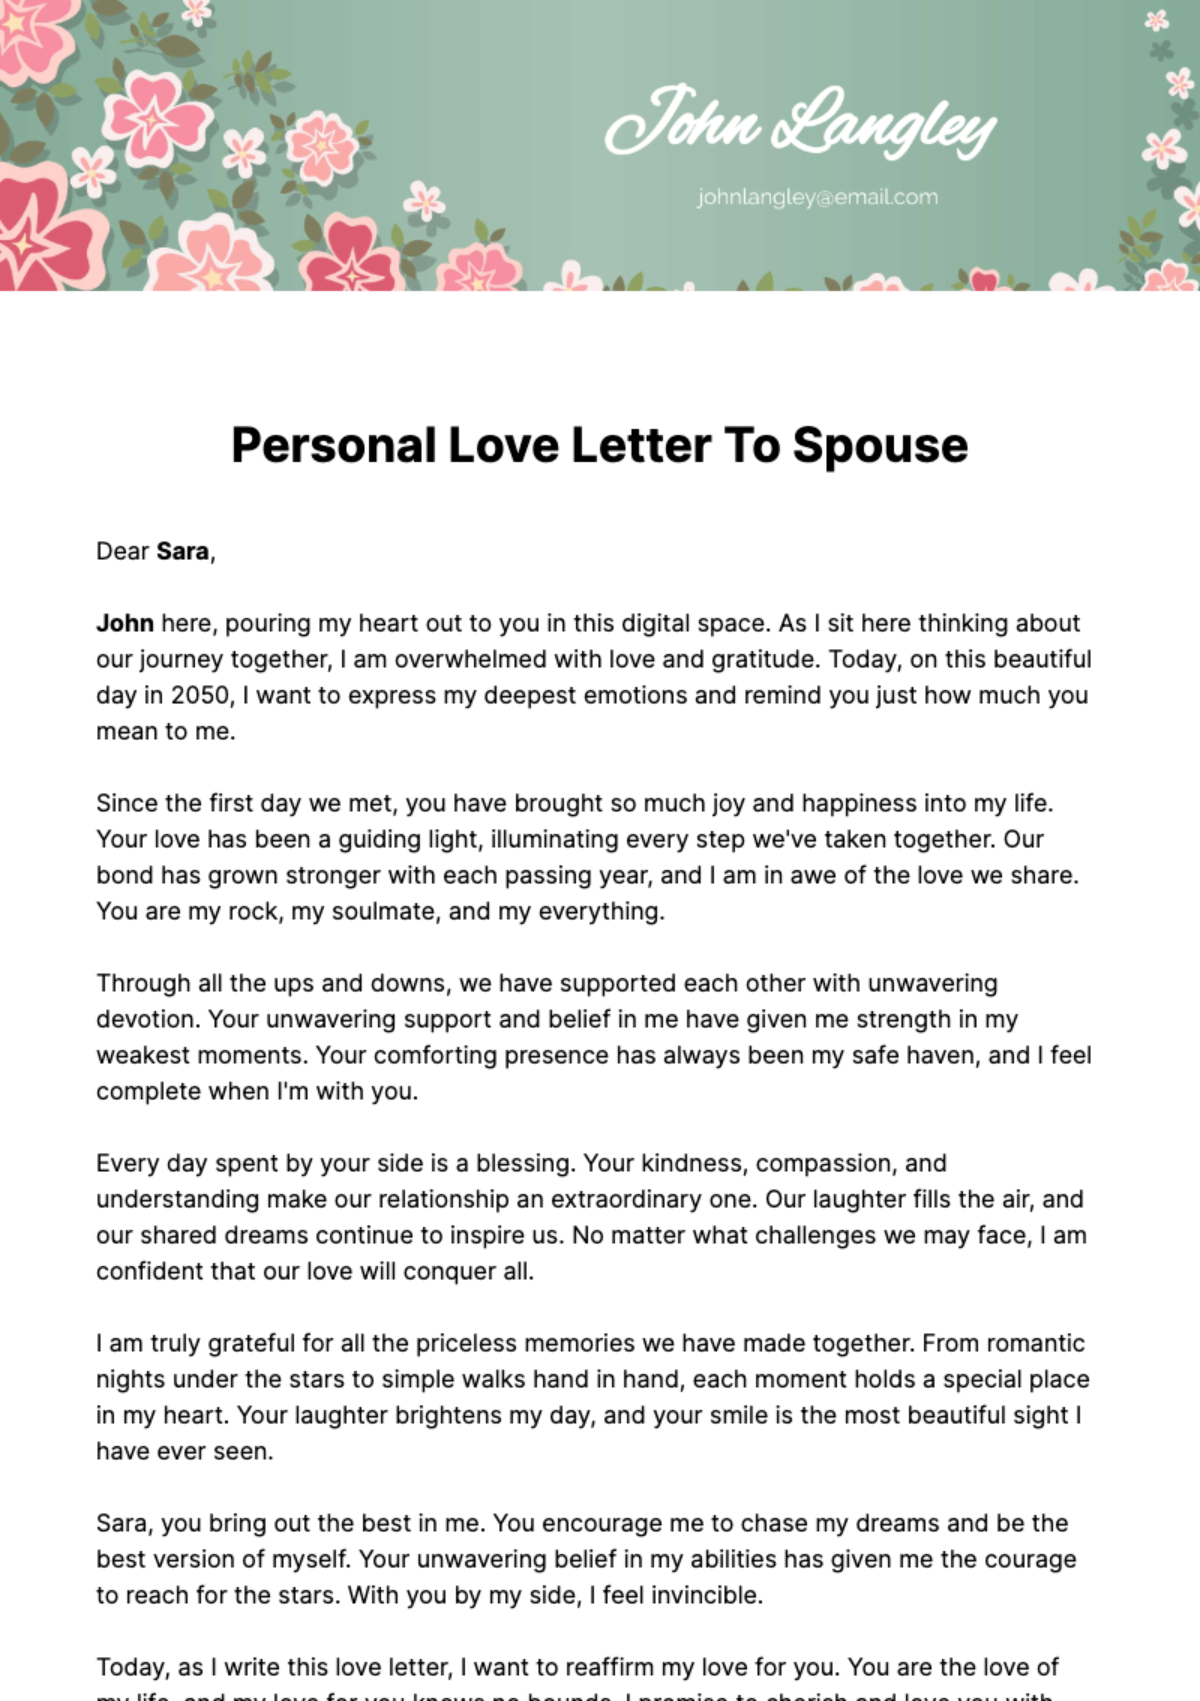 Personal Love Letter to Spouse  Template